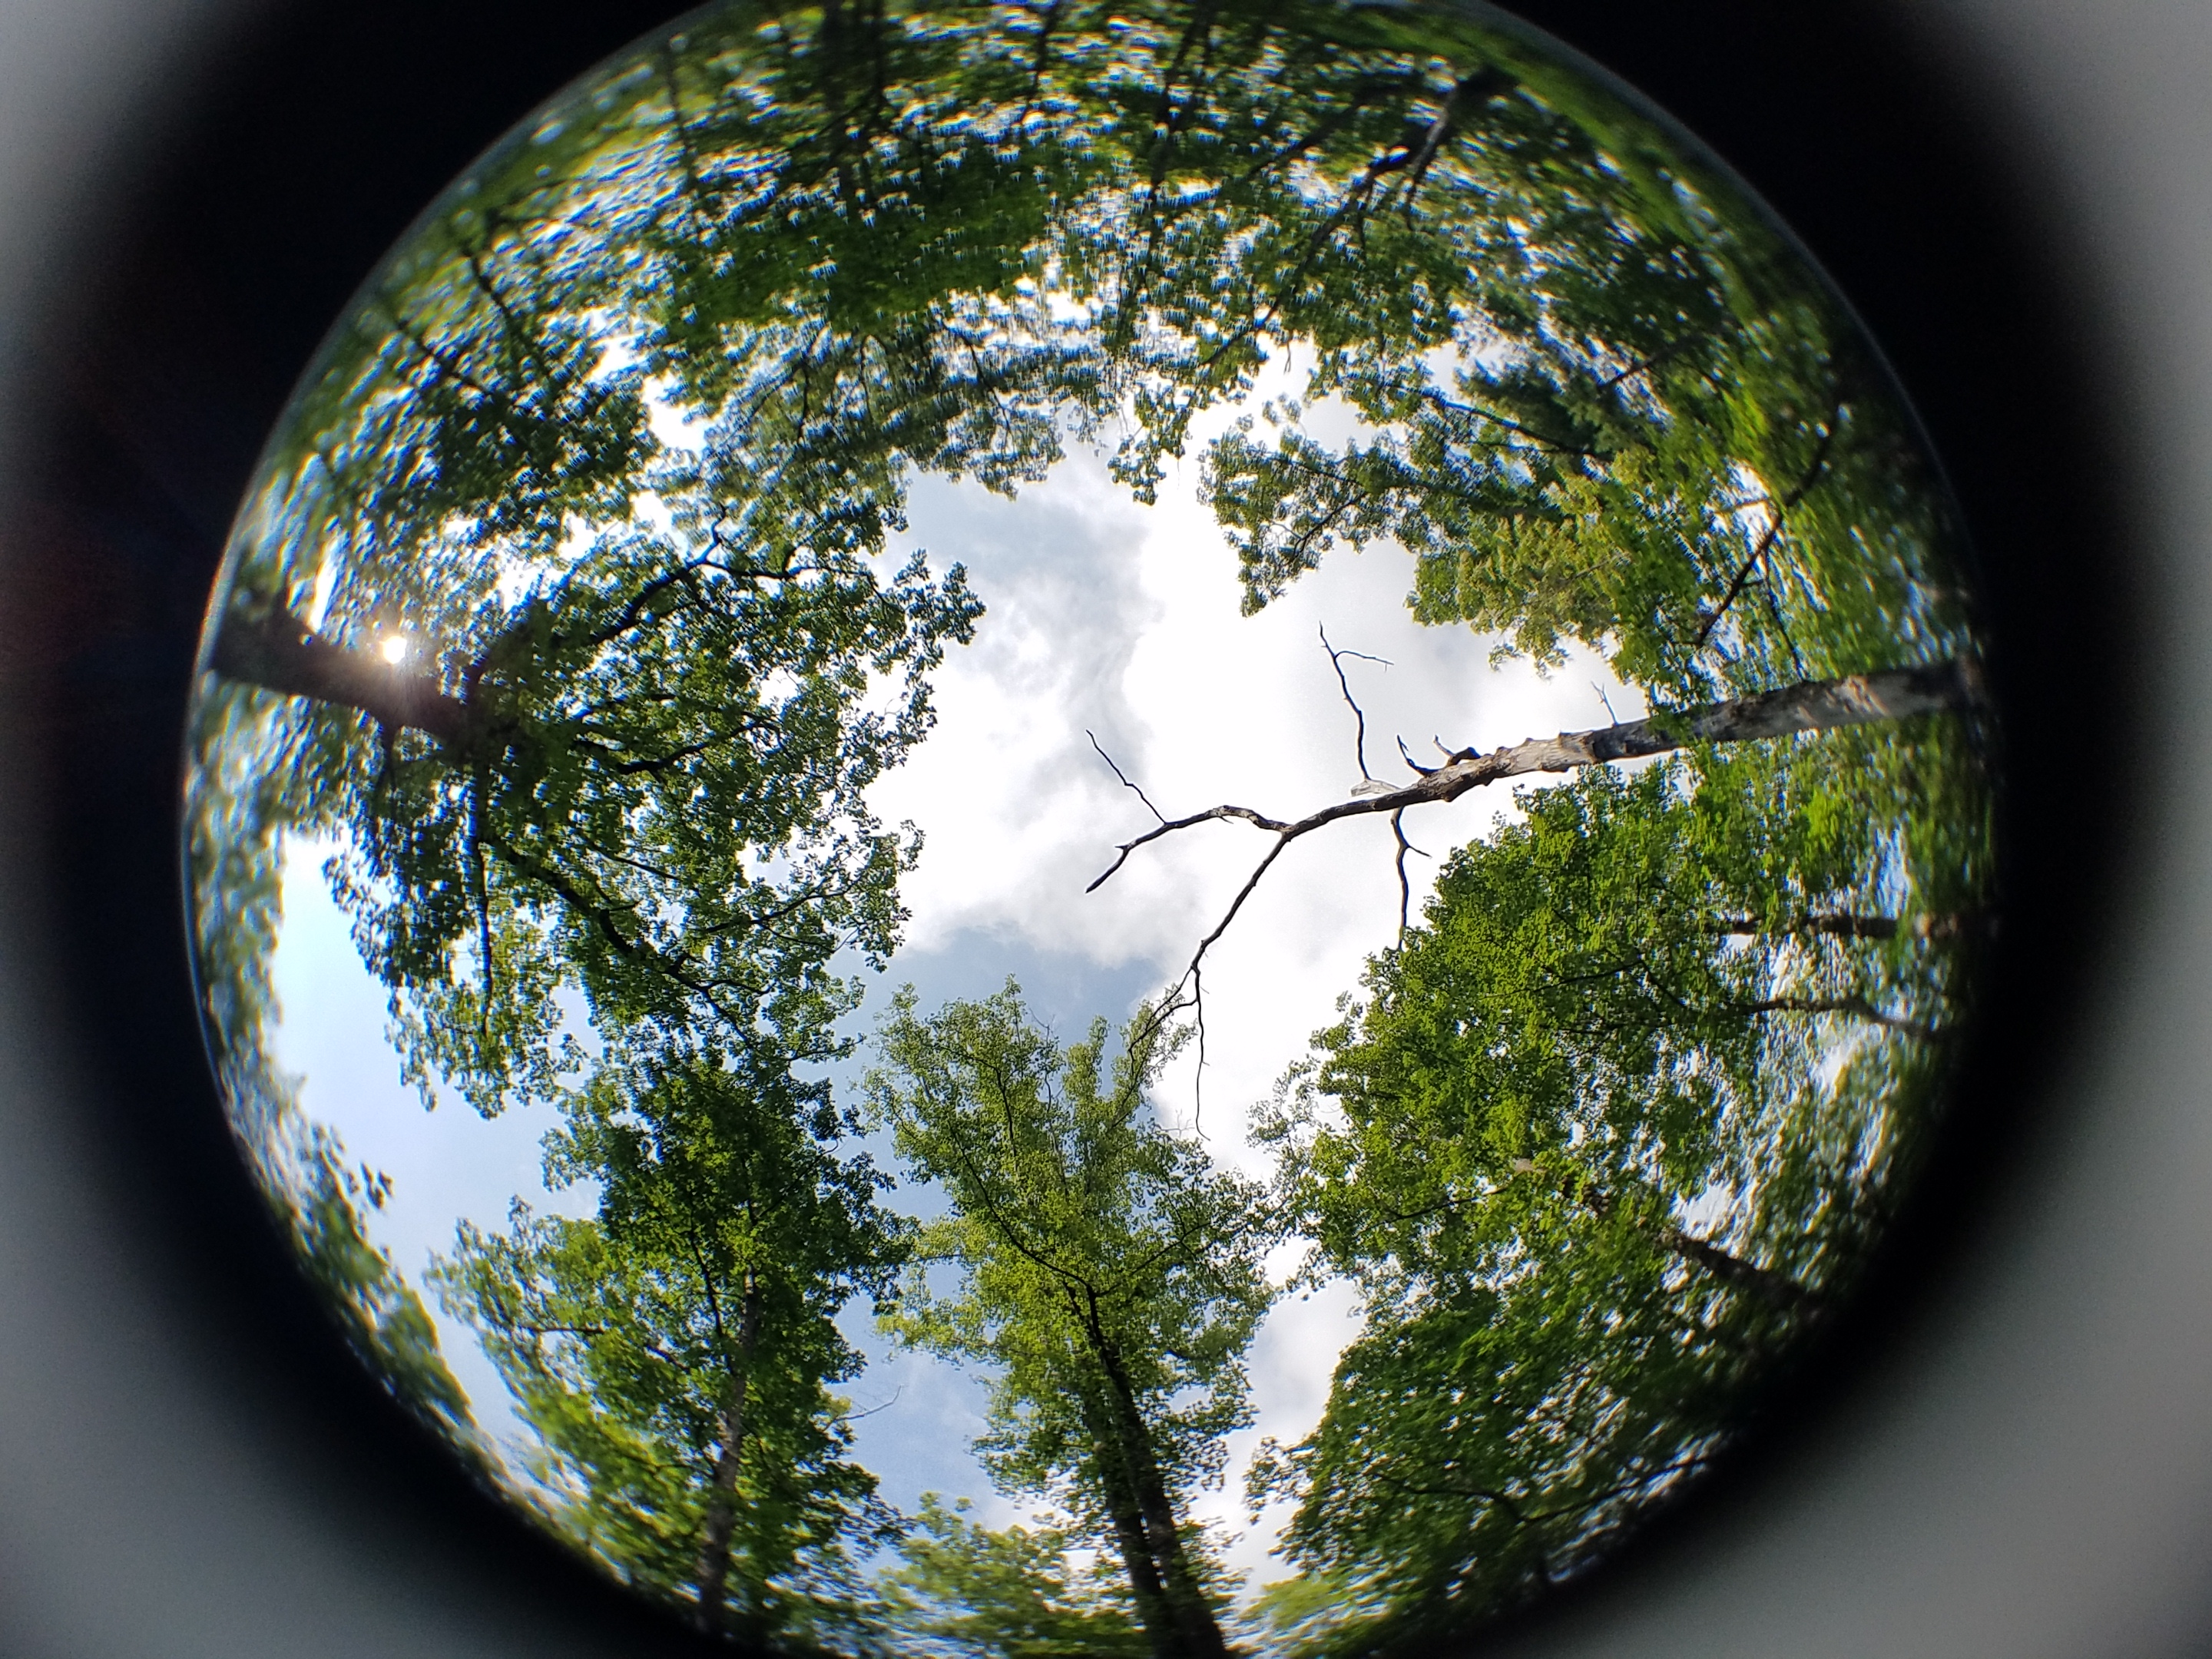 Fisheye view from the forest floor